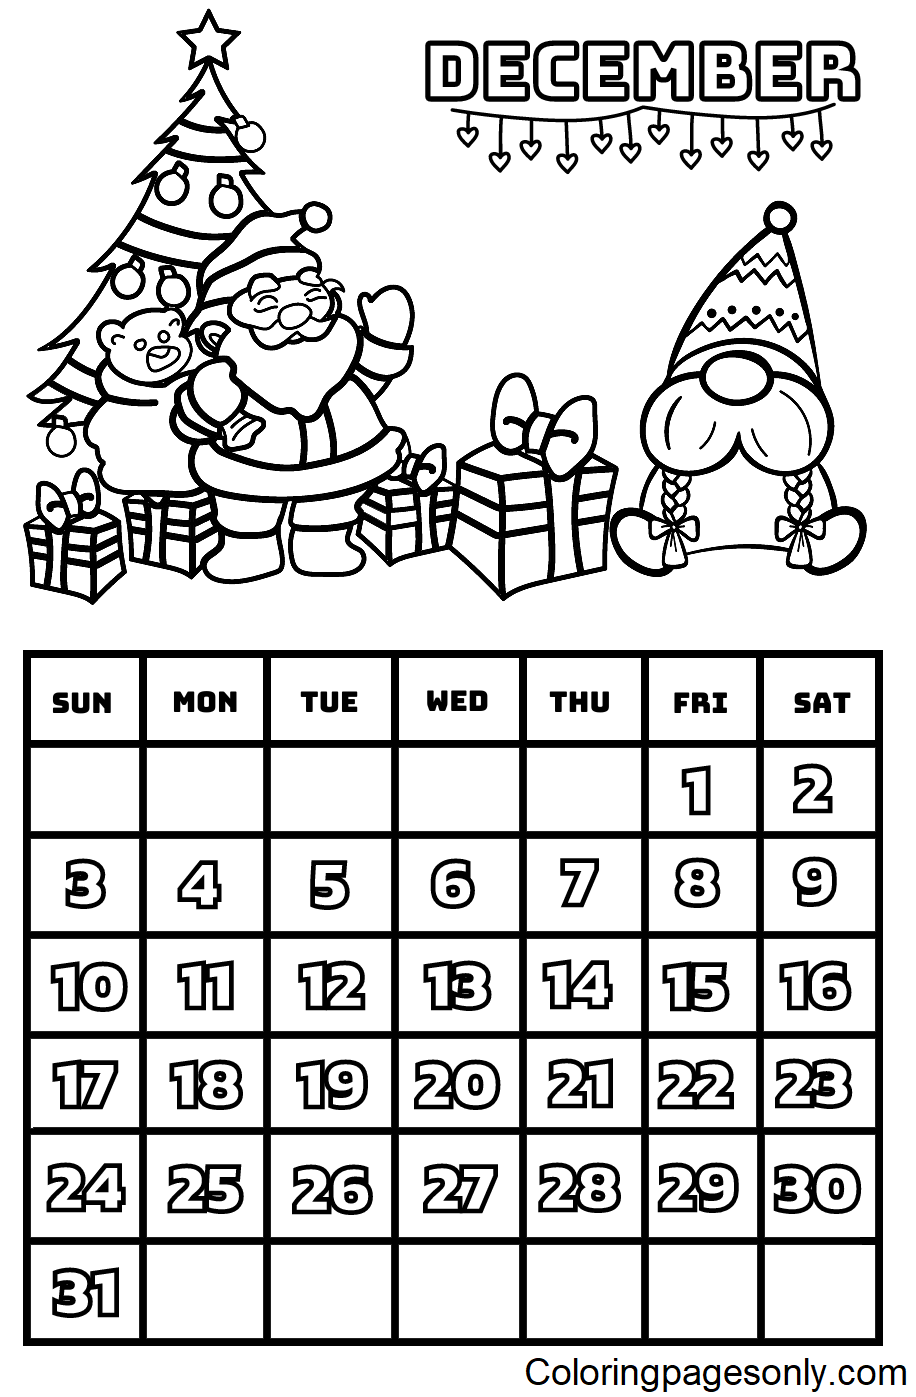 Calendar coloring pages printable for free download